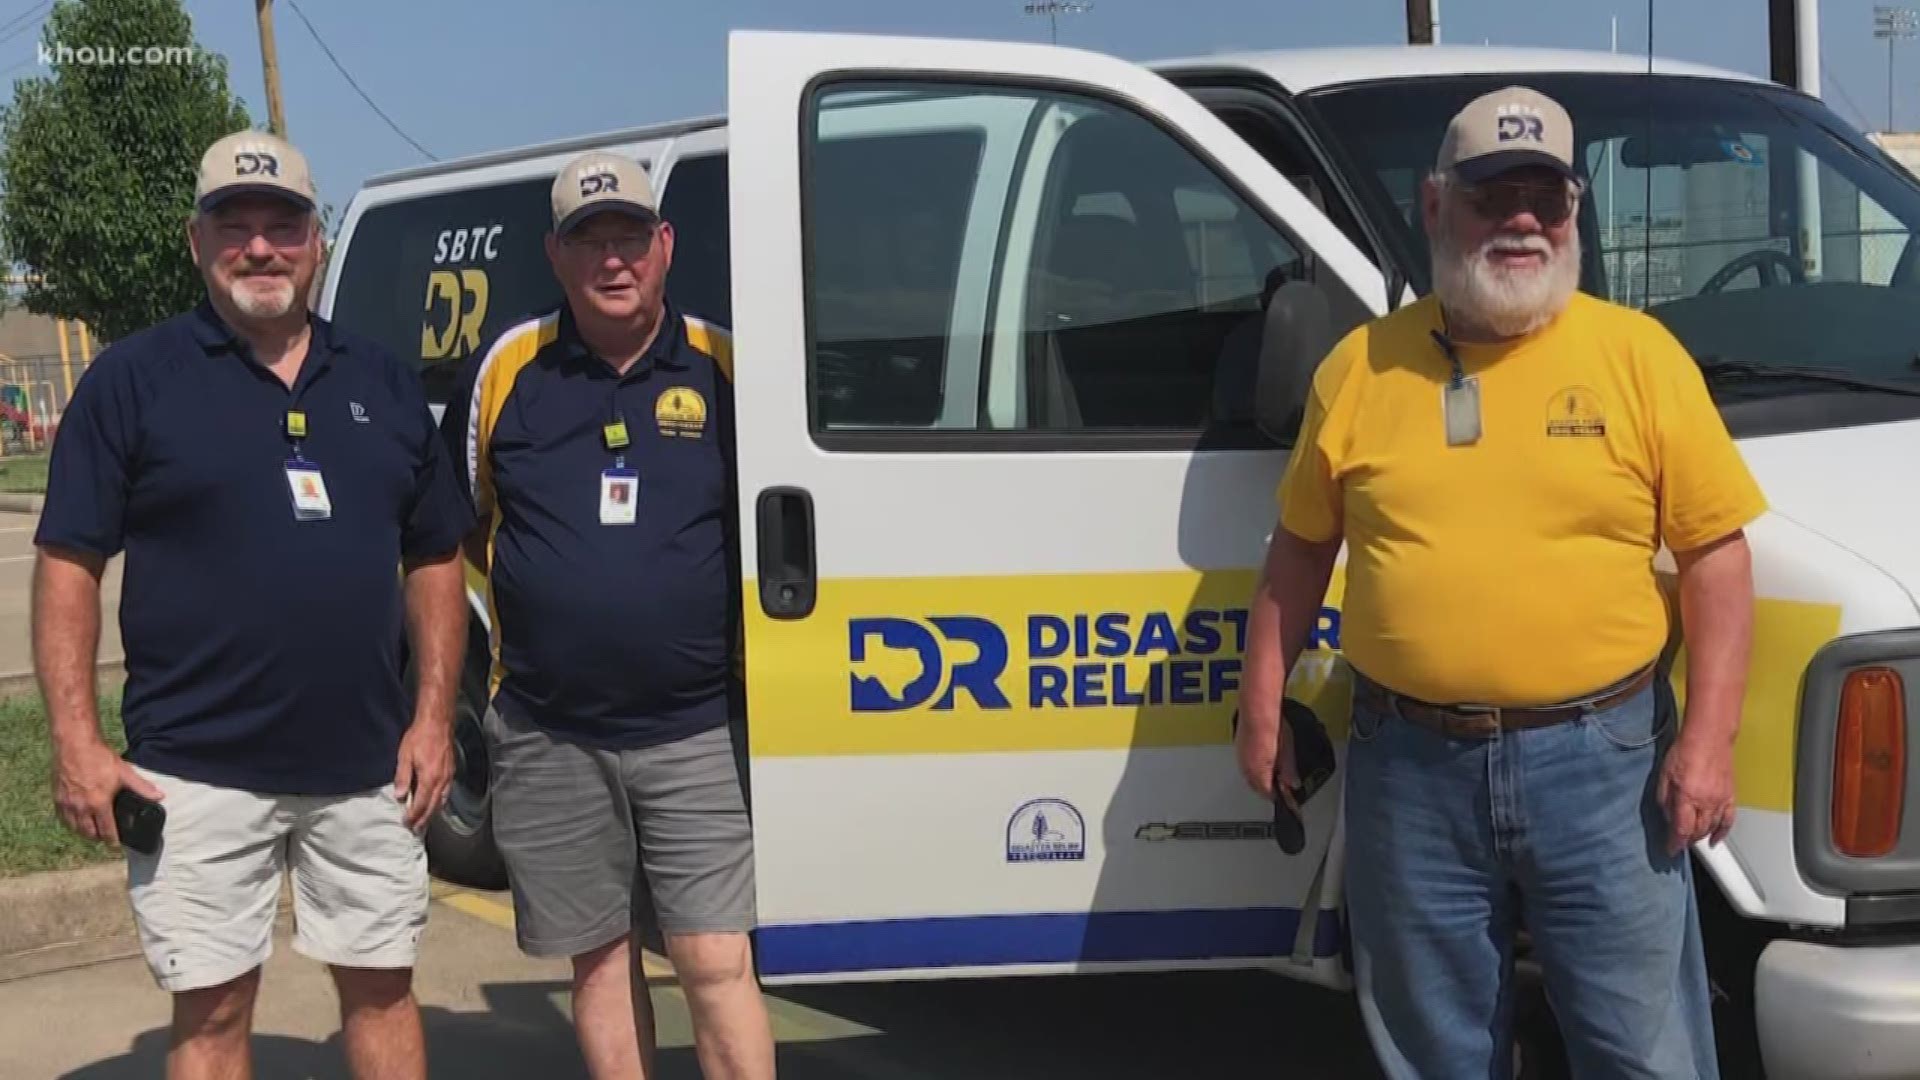 A team of chaplains, including a pastor from Conroe, traveled to El Paso to help those in need and provide support.